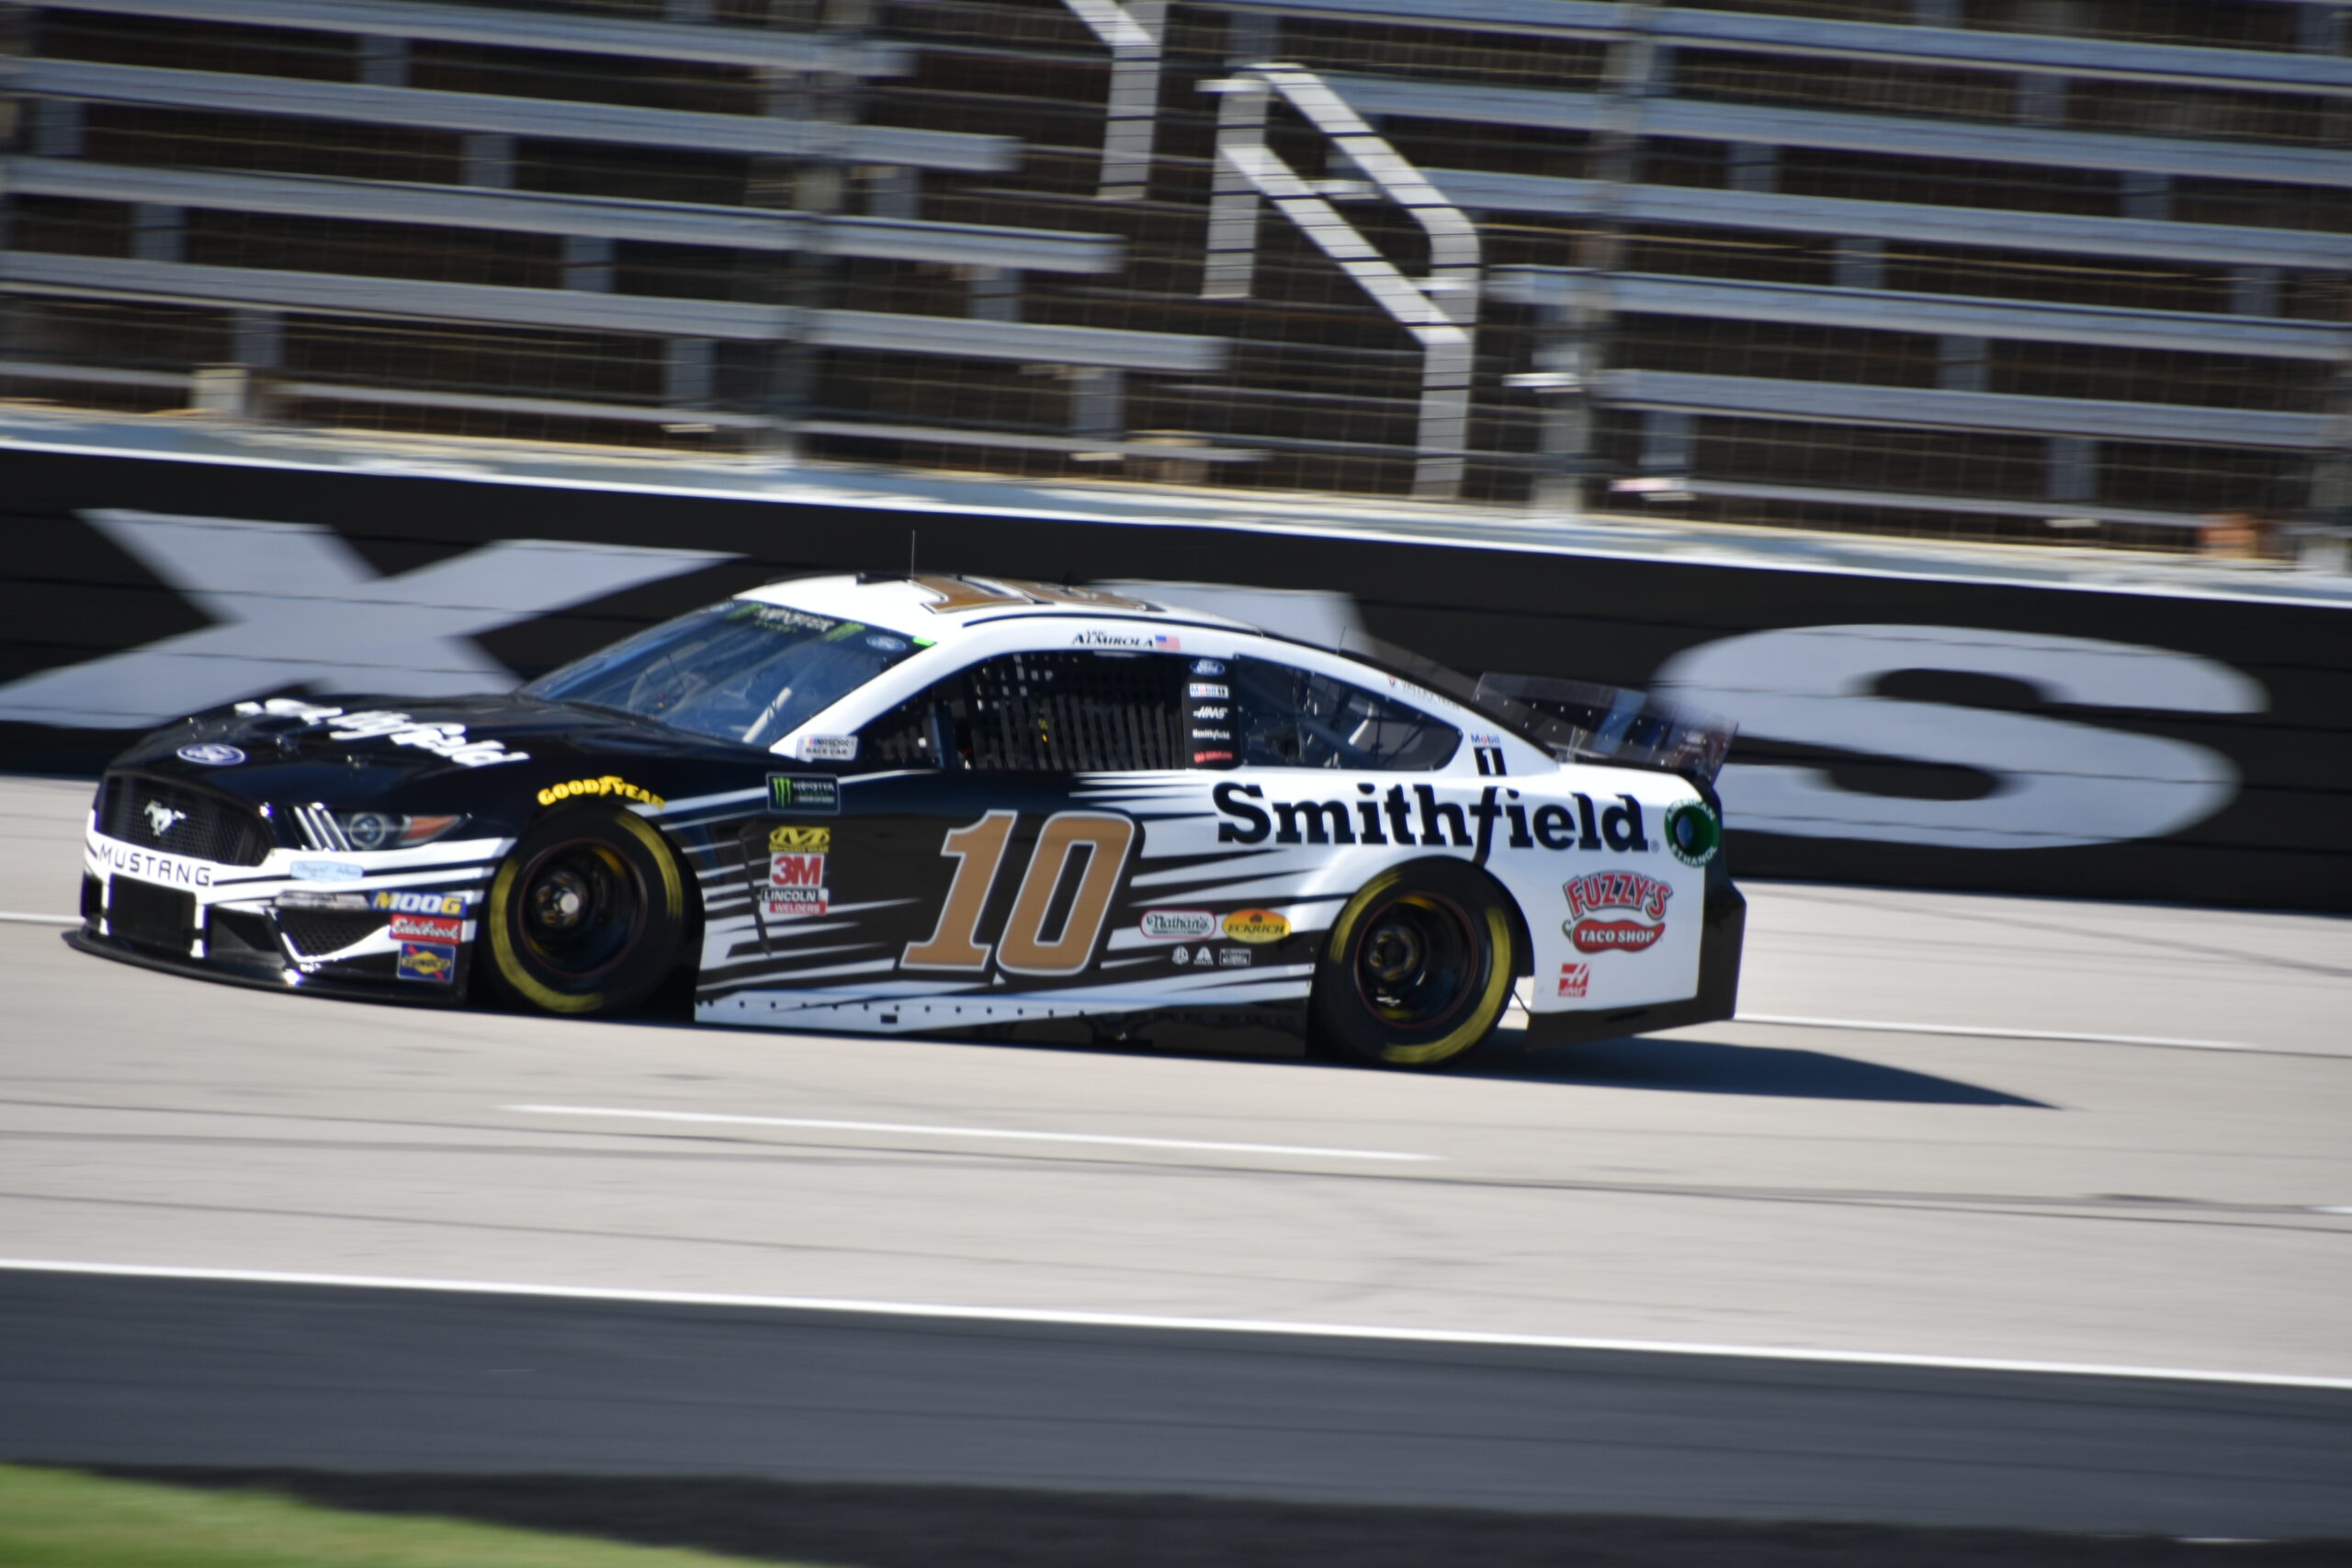 As can be seen, Almirola showcased speed with a runner-up finish at Texas' Playoffs race. (Photo Credit: Sean Folsom/TPF)